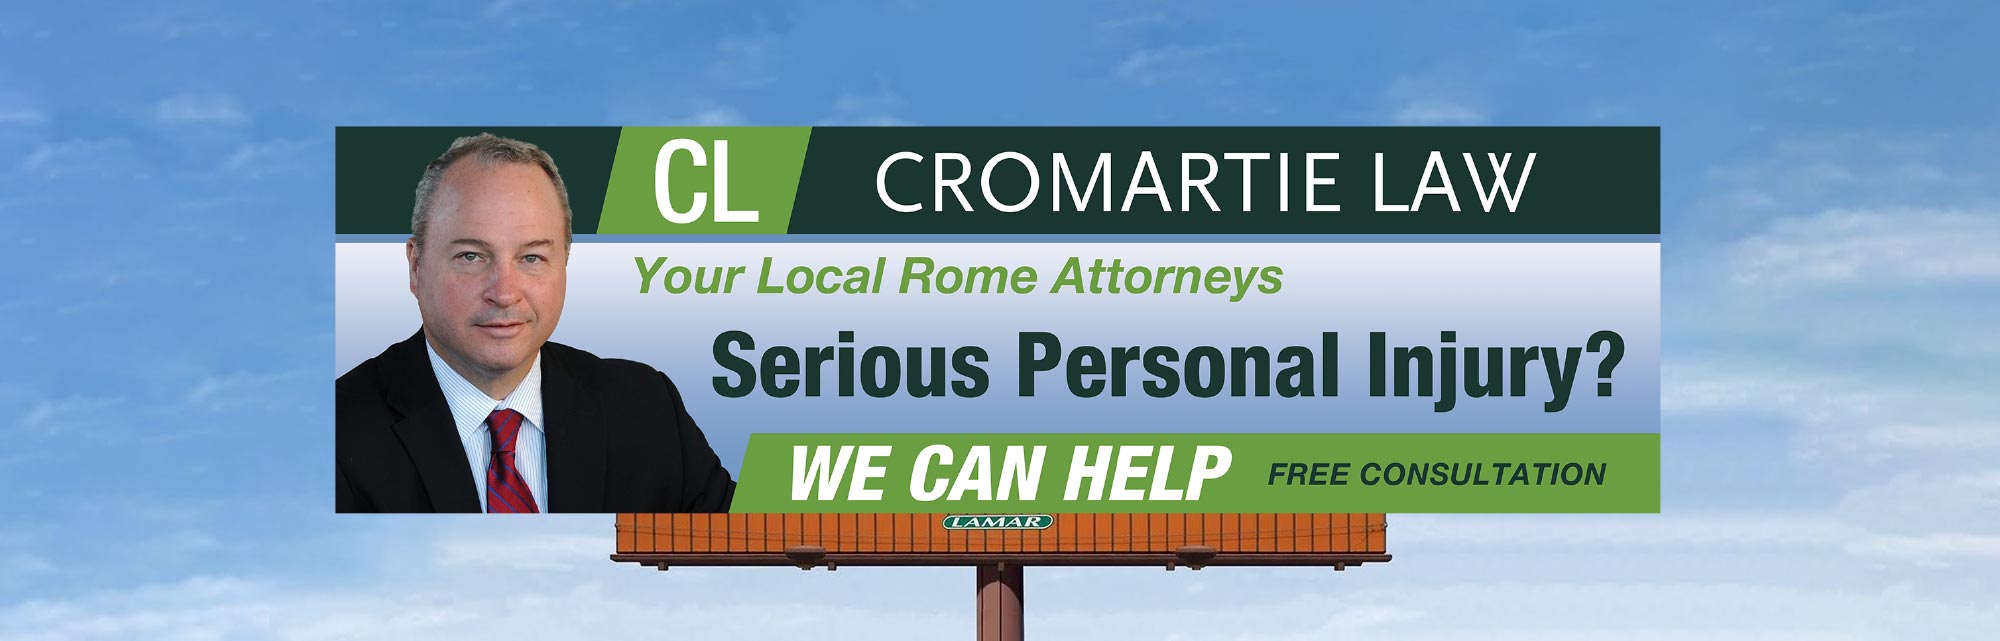 Cromartie Law Your Local Rome Attorneys. Serious Personal Injury? We Can Help. Free Consultation.